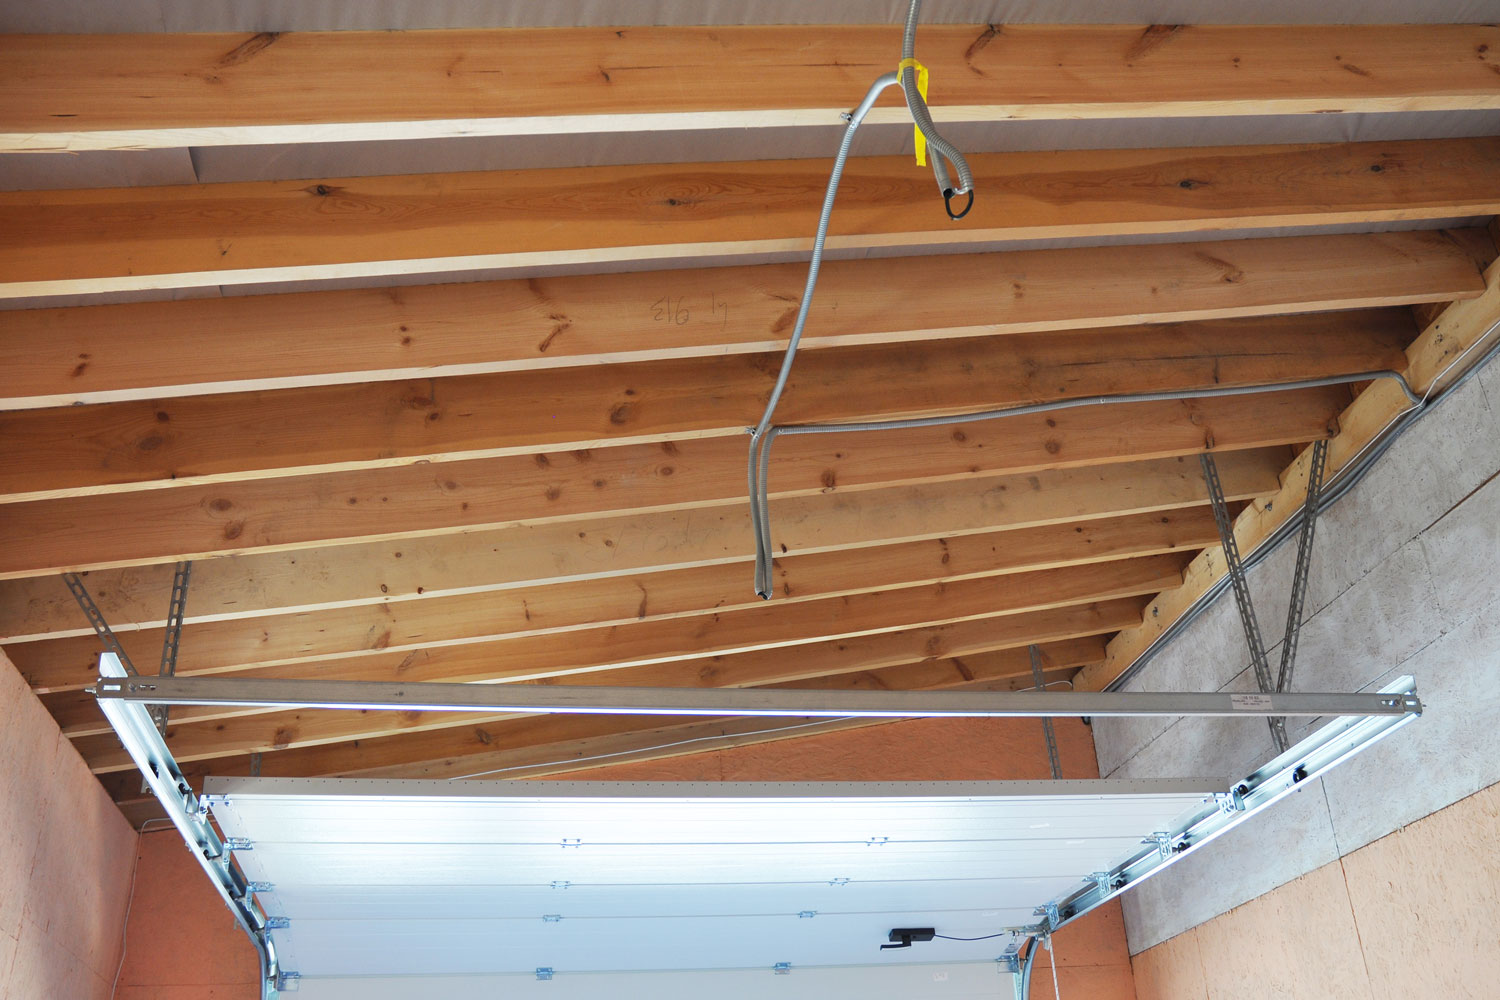 How To Insulate Garage Ceiling Rafters, How To Insulate A Garage Ceiling Already Drywalled